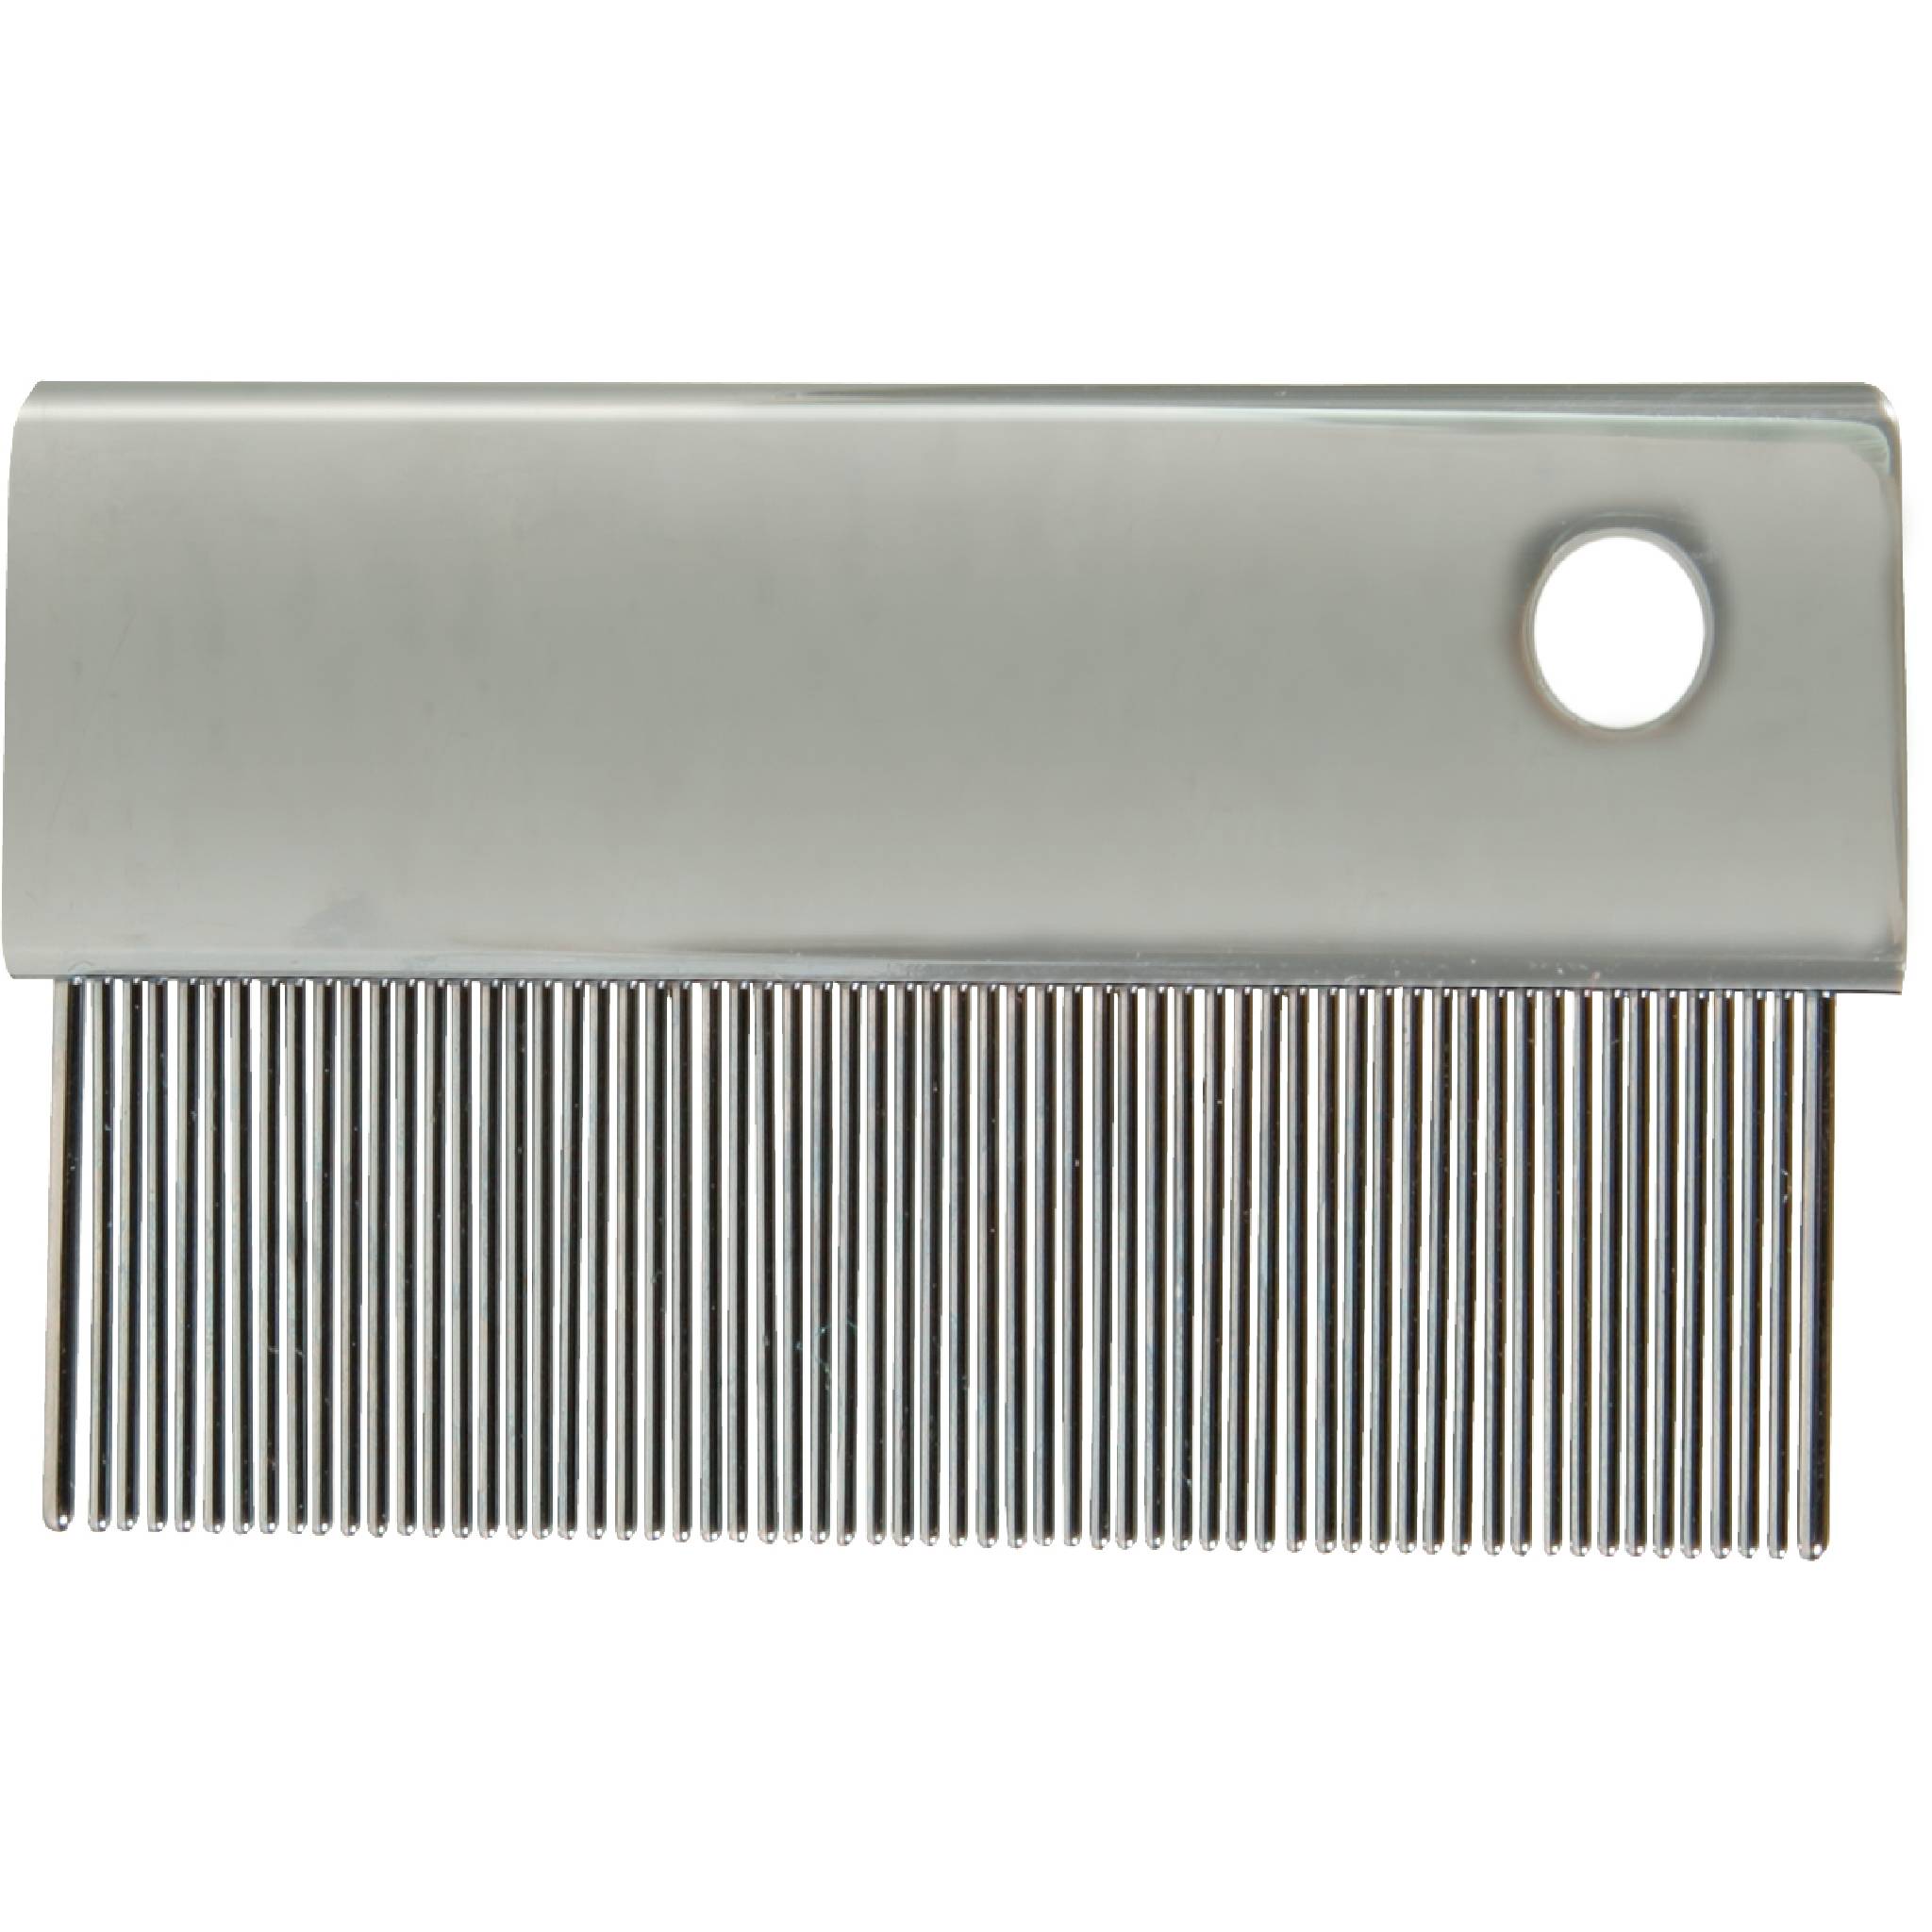 Trixie Flea and Dust Comb Metal